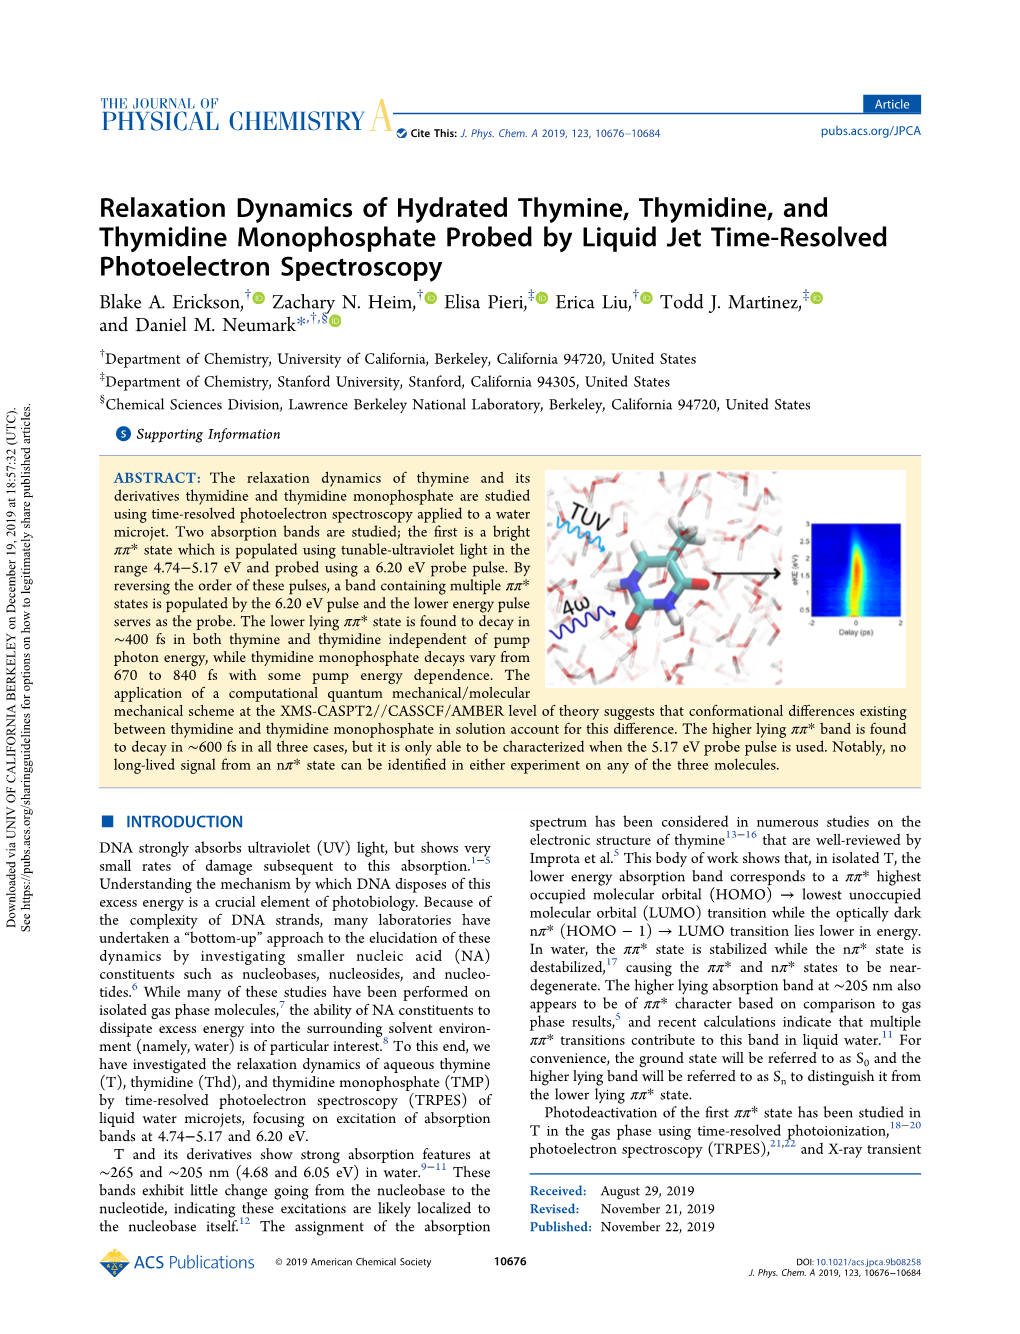 Relaxation Dynamics of Hydrated Thymine, Thymidine, and Thymidine Monophosphate Probed by Liquid Jet Time-Resolved Photoelectron Spectroscopy Blake A